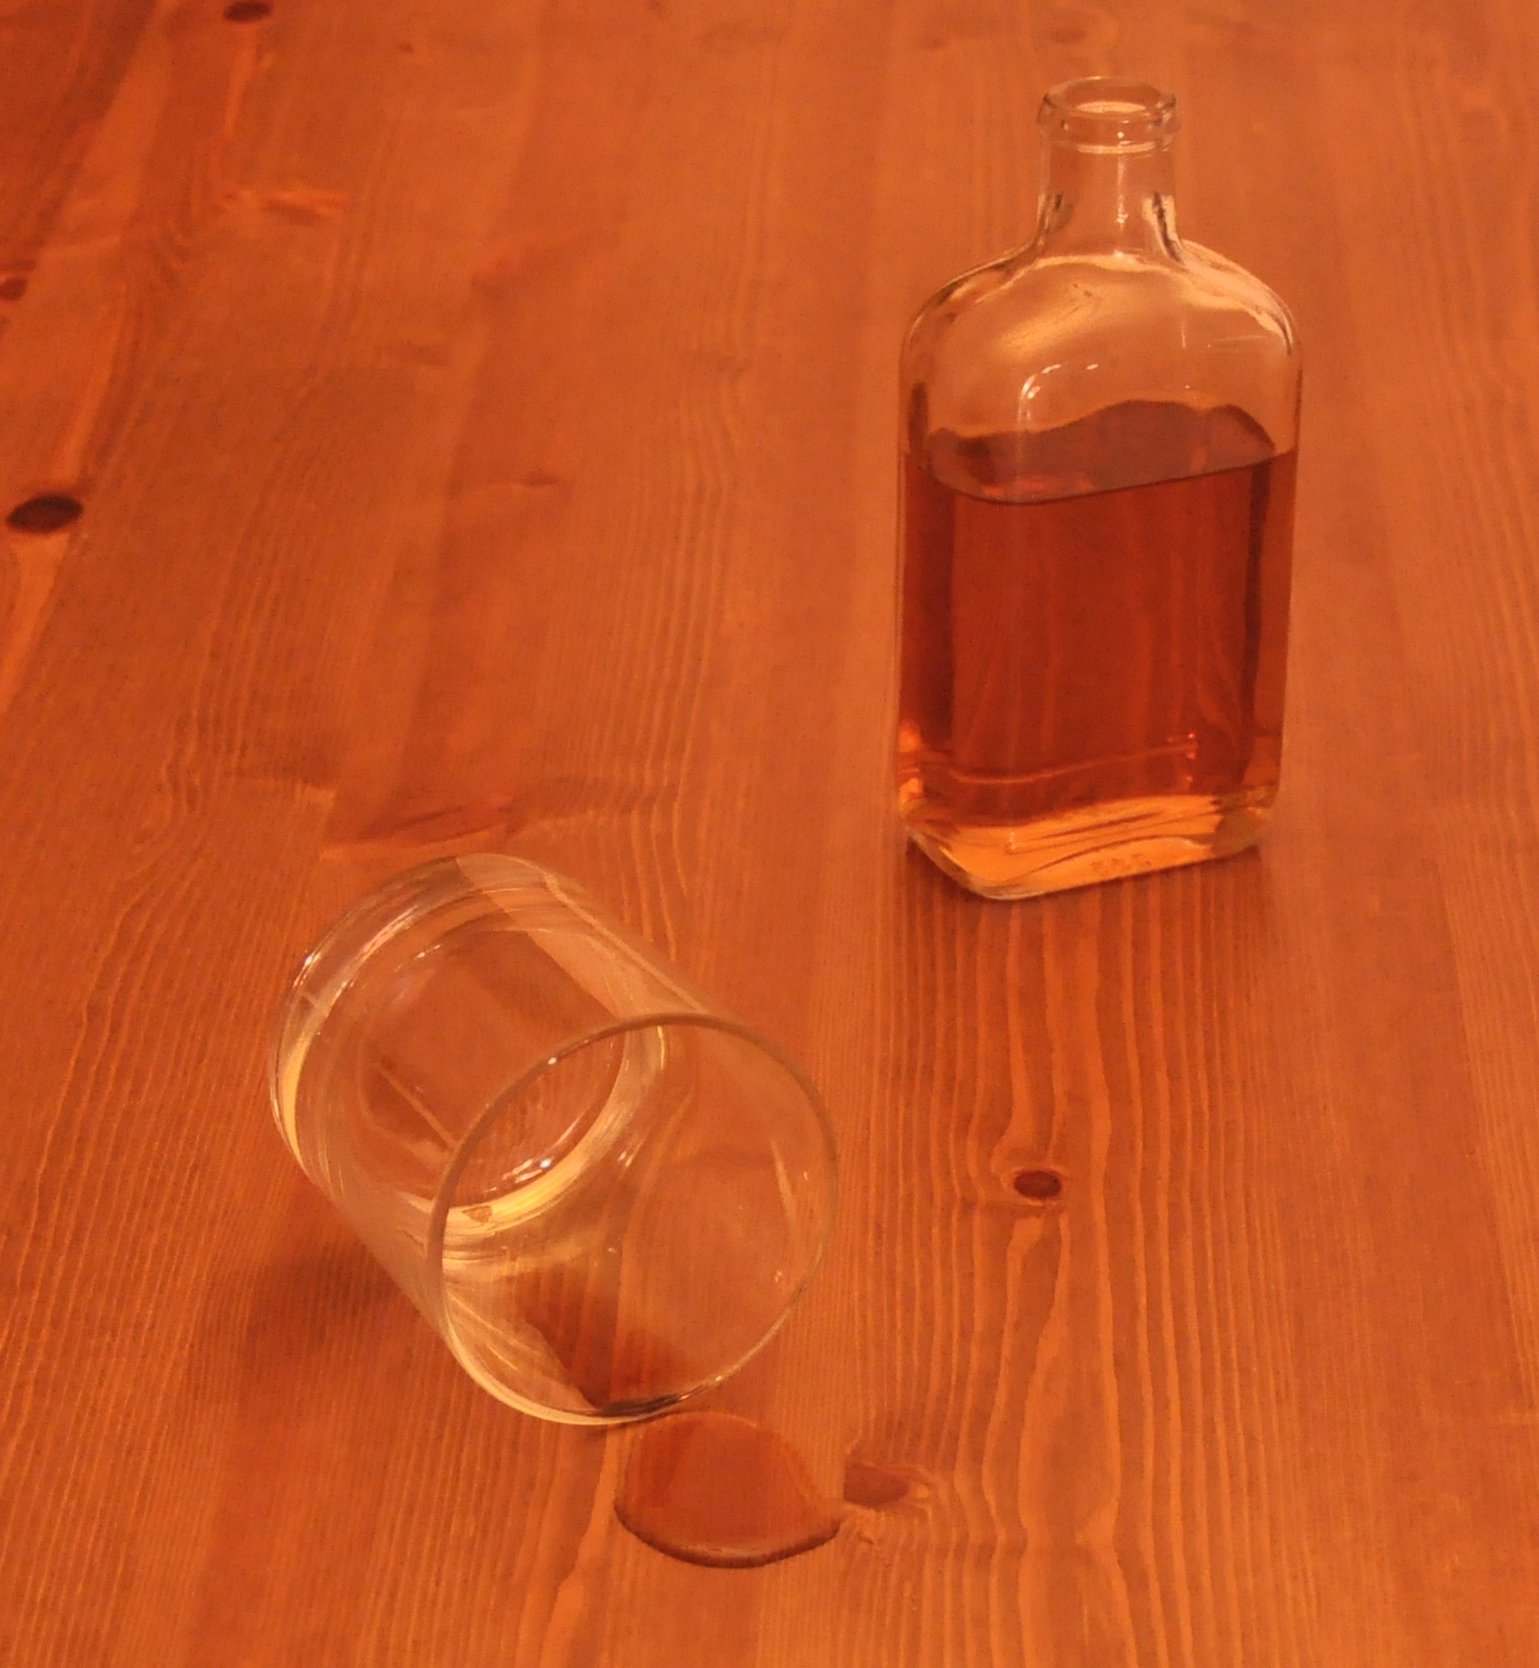 a bottle and glass on a wooden table